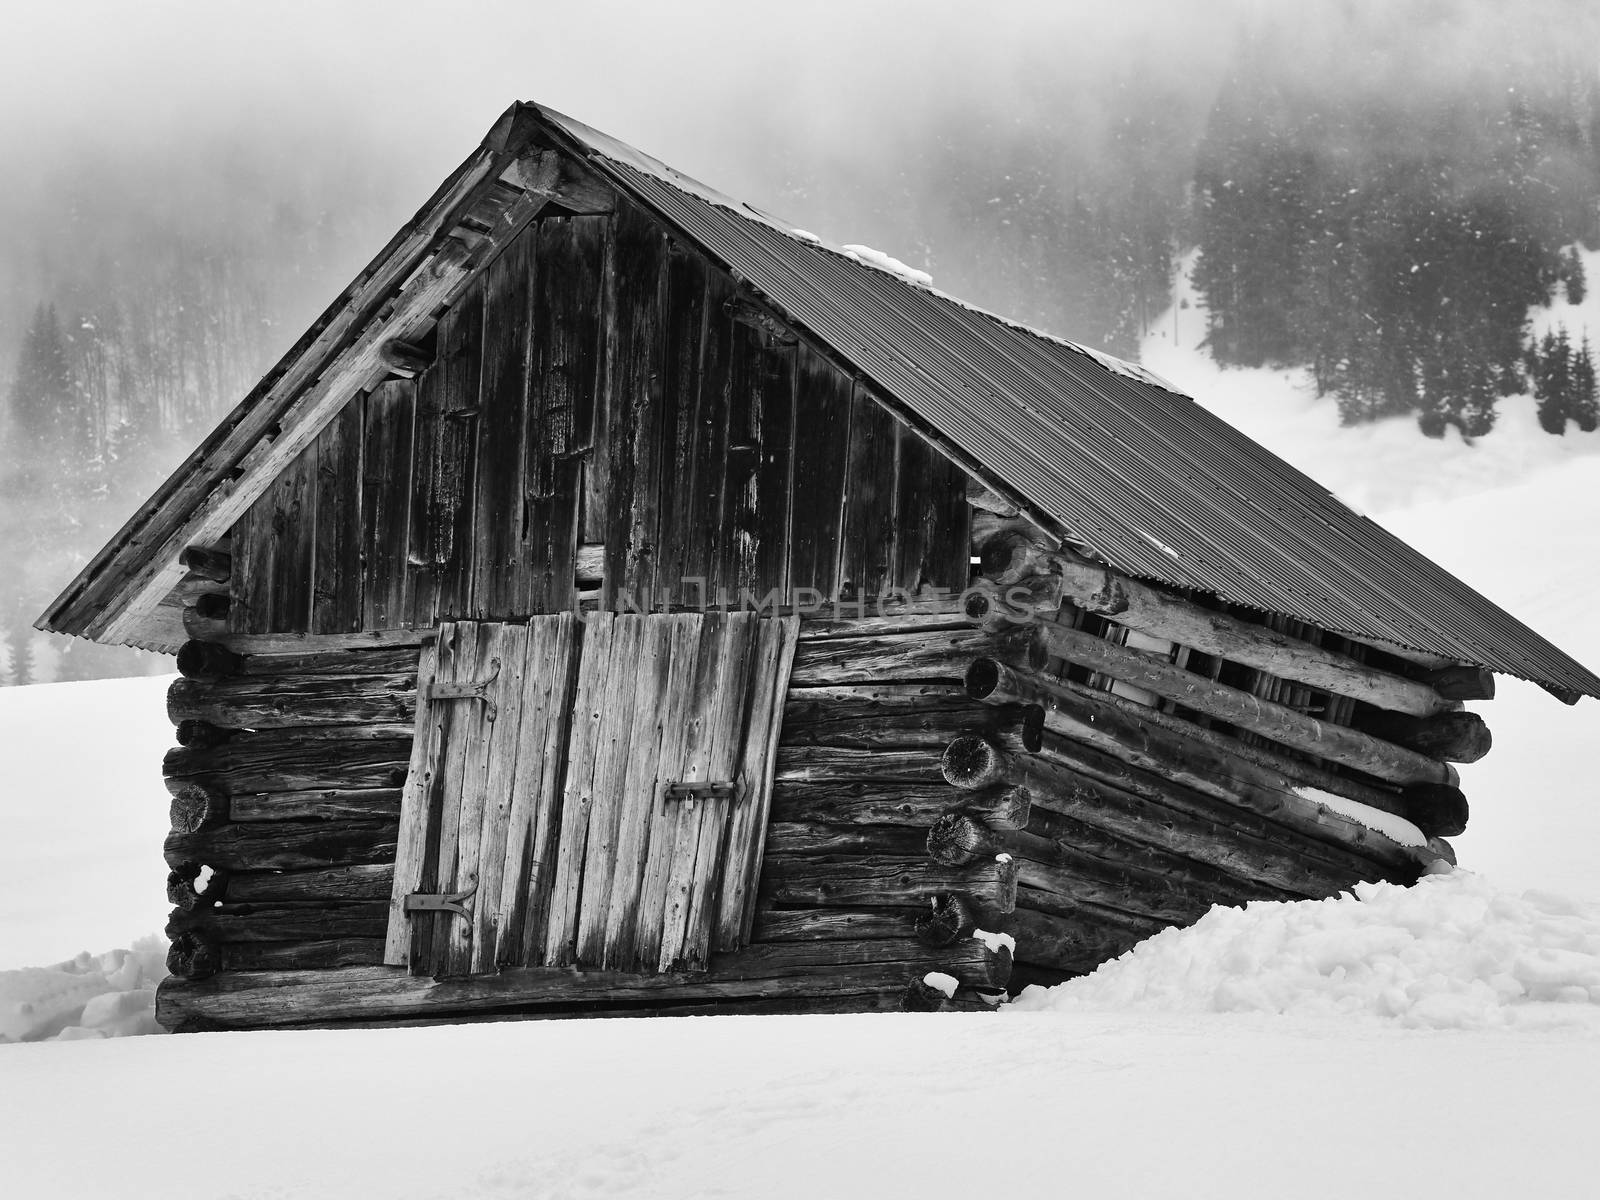 Closeup Black and White image of wooden barn in snowy mountains